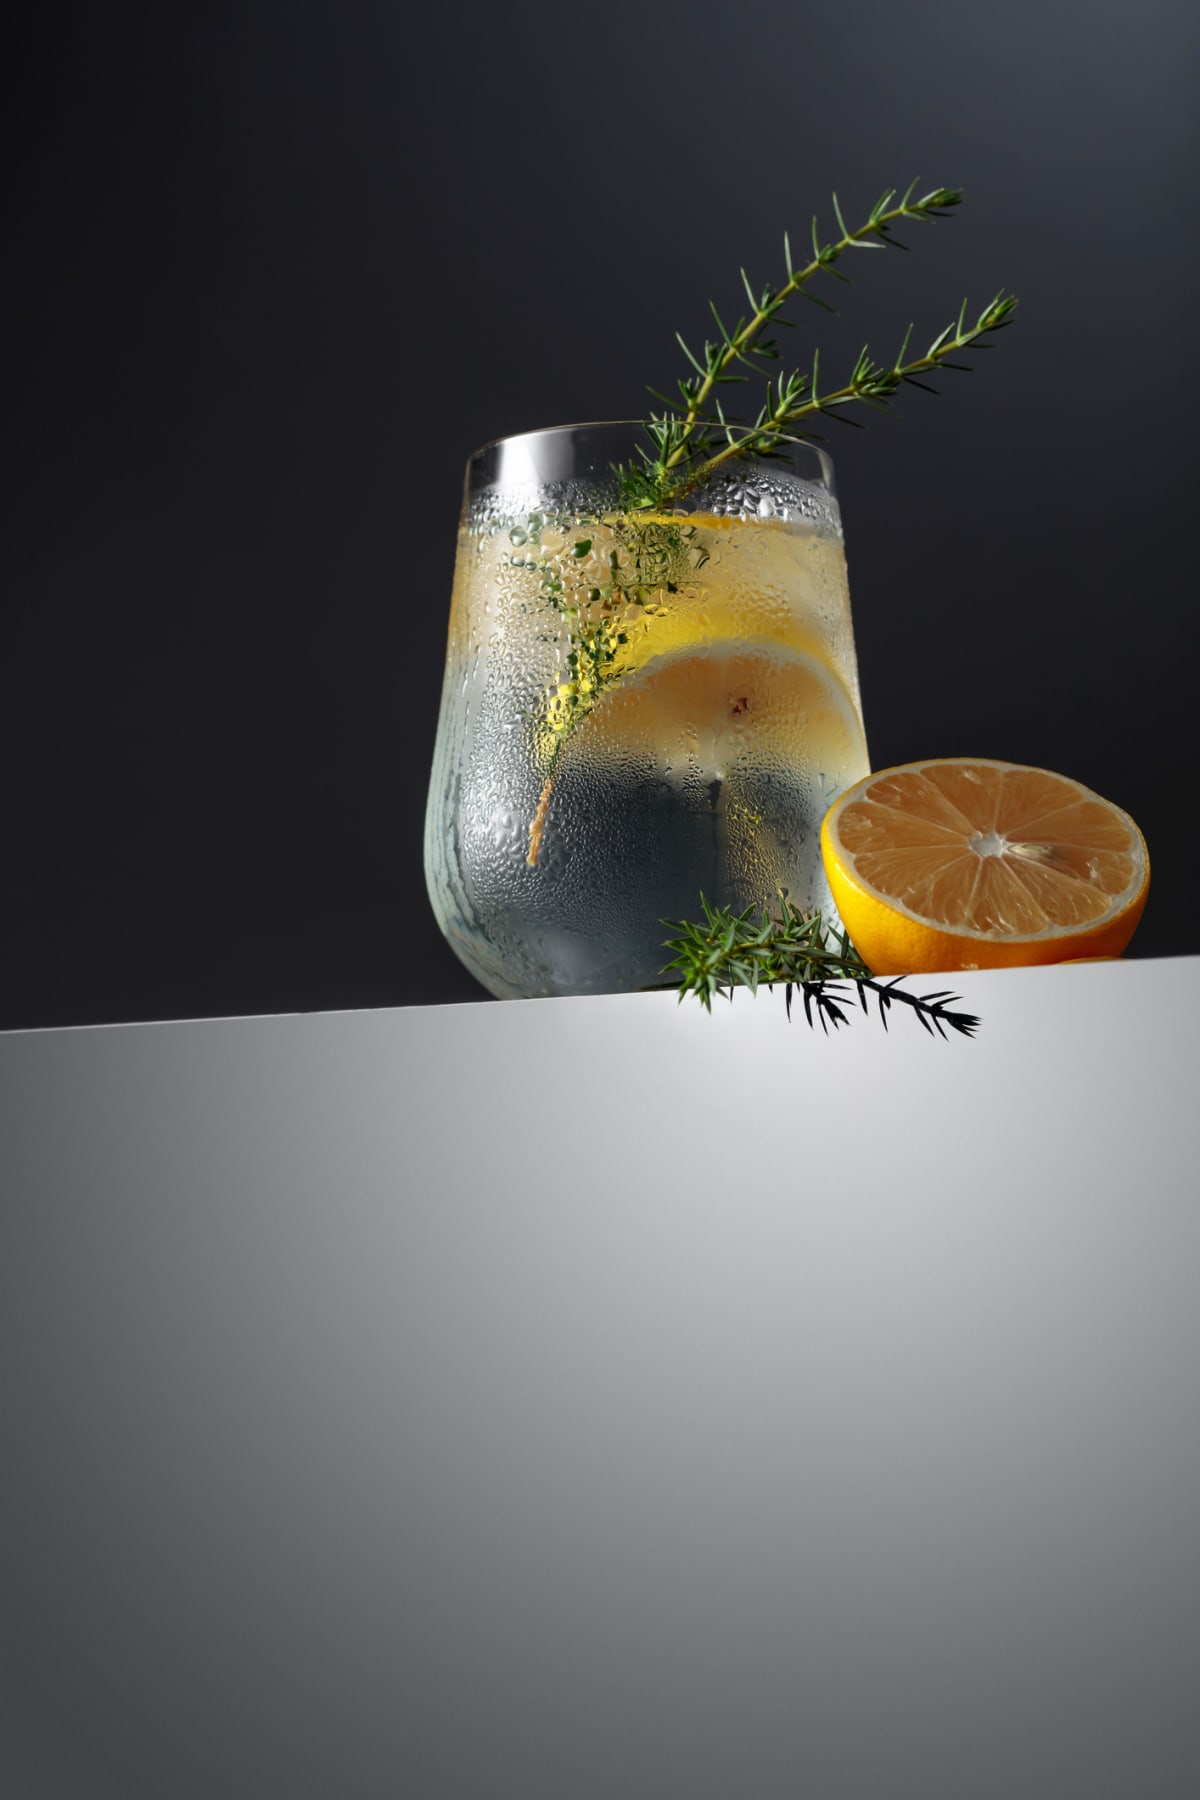 Gin and Tonic Alcohol drink with Lime, Rosemary and ice on rustic black table.